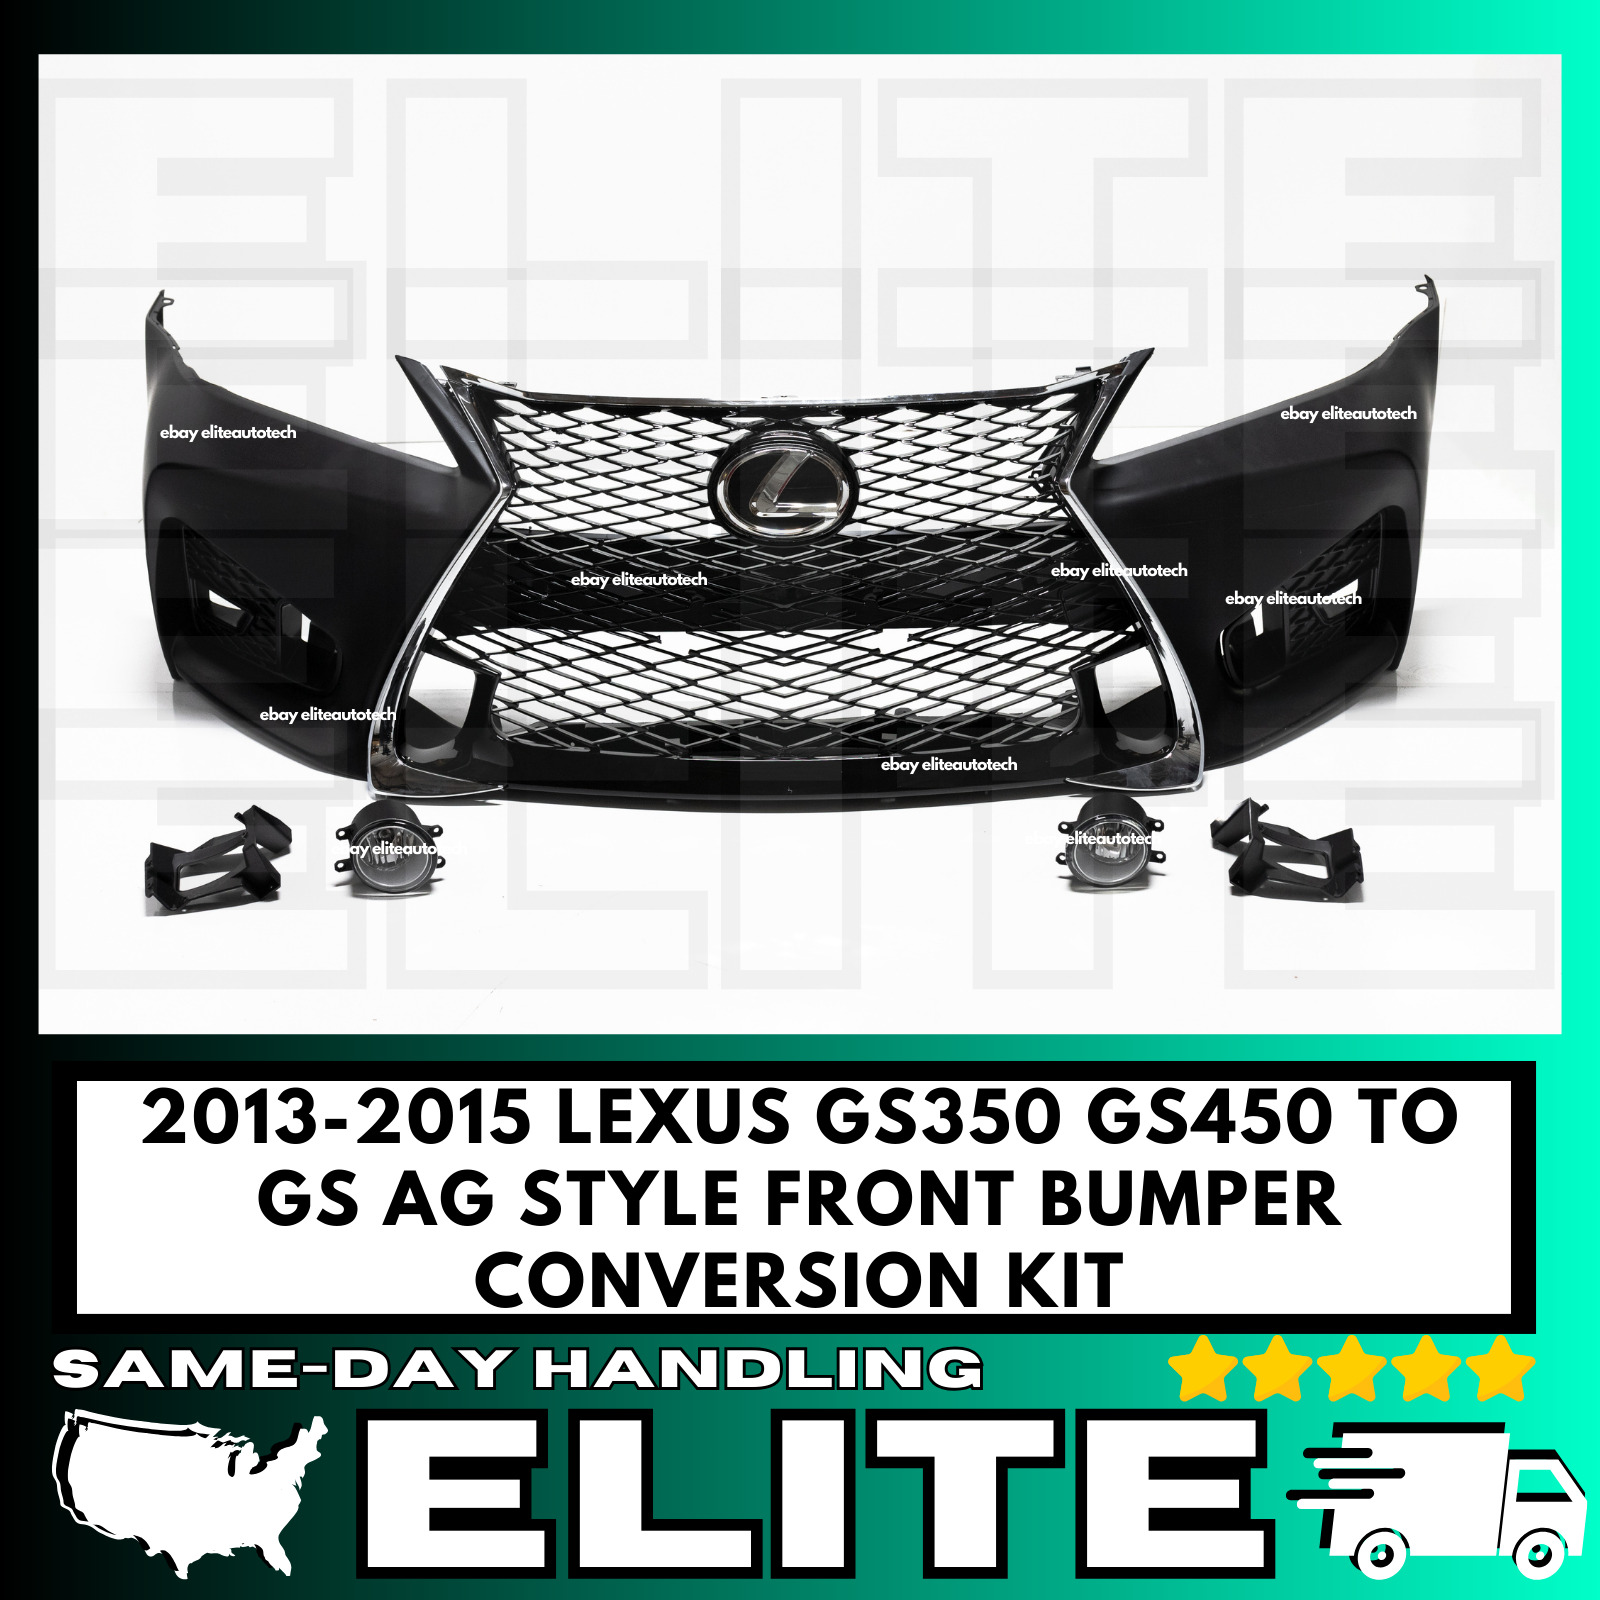 For 2013-2015 Lexus GS GS350 GS450h Conversion to F Sport AG Style Front Bumper